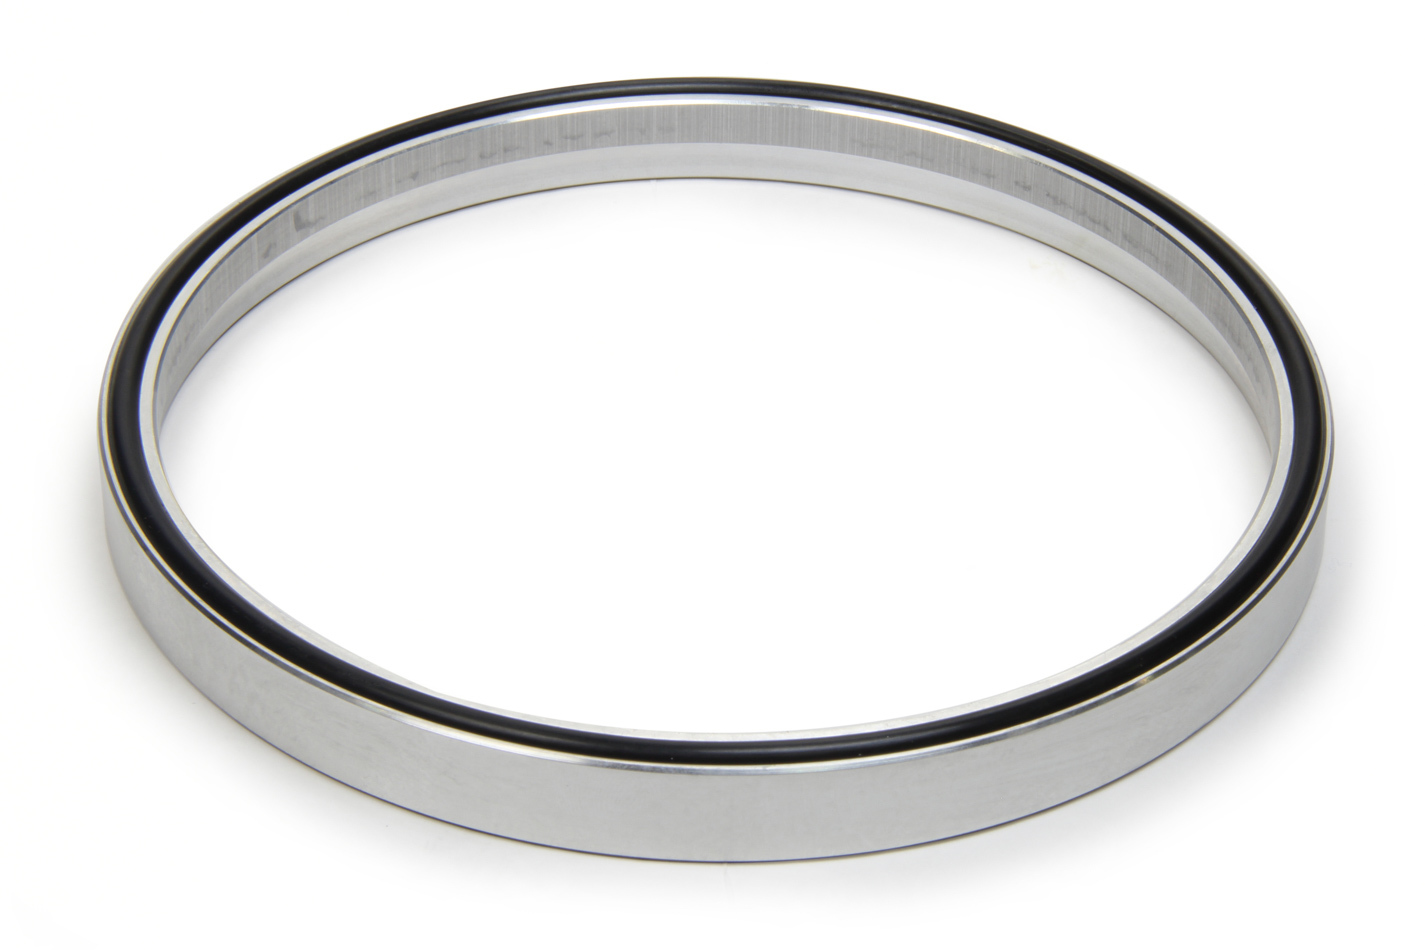 Allstar Performance 25944 Air Cleaner Spacer, Sure Seal, 1/2 in Thick, 5-1/8 in Carb Flange, Aluminum, Natural, Each